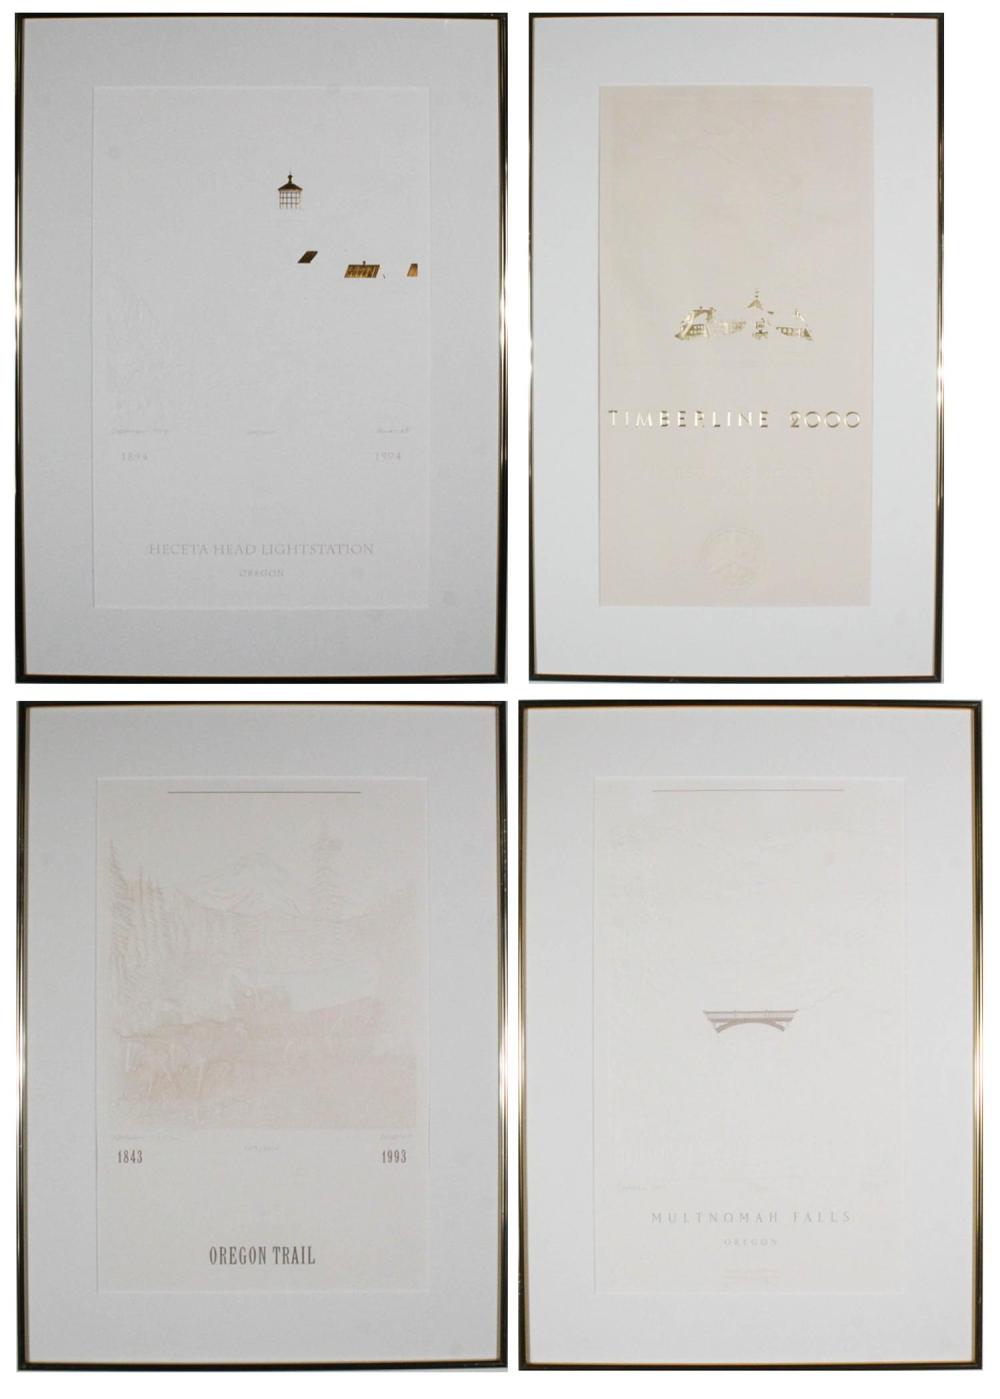 FOUR EMBOSSED COLLECTIBLE PRINTS